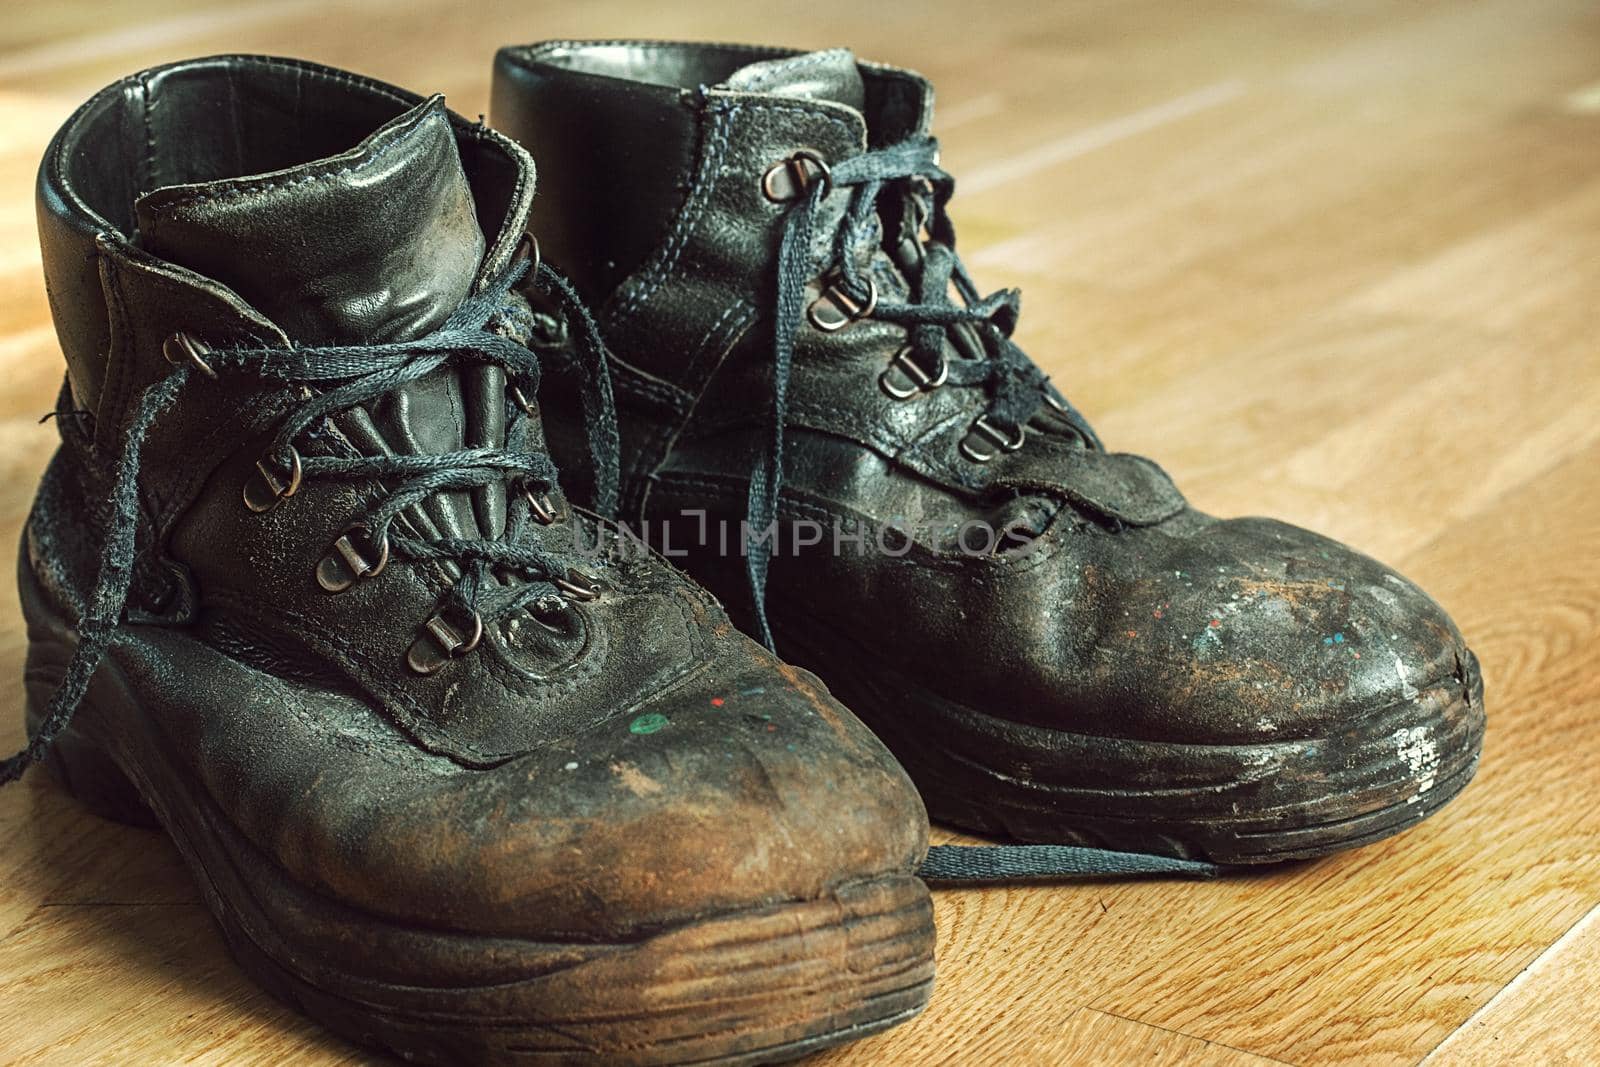 Old worn-out workman's shoes. Shoes that require repair or replacement by SergeyPakulin